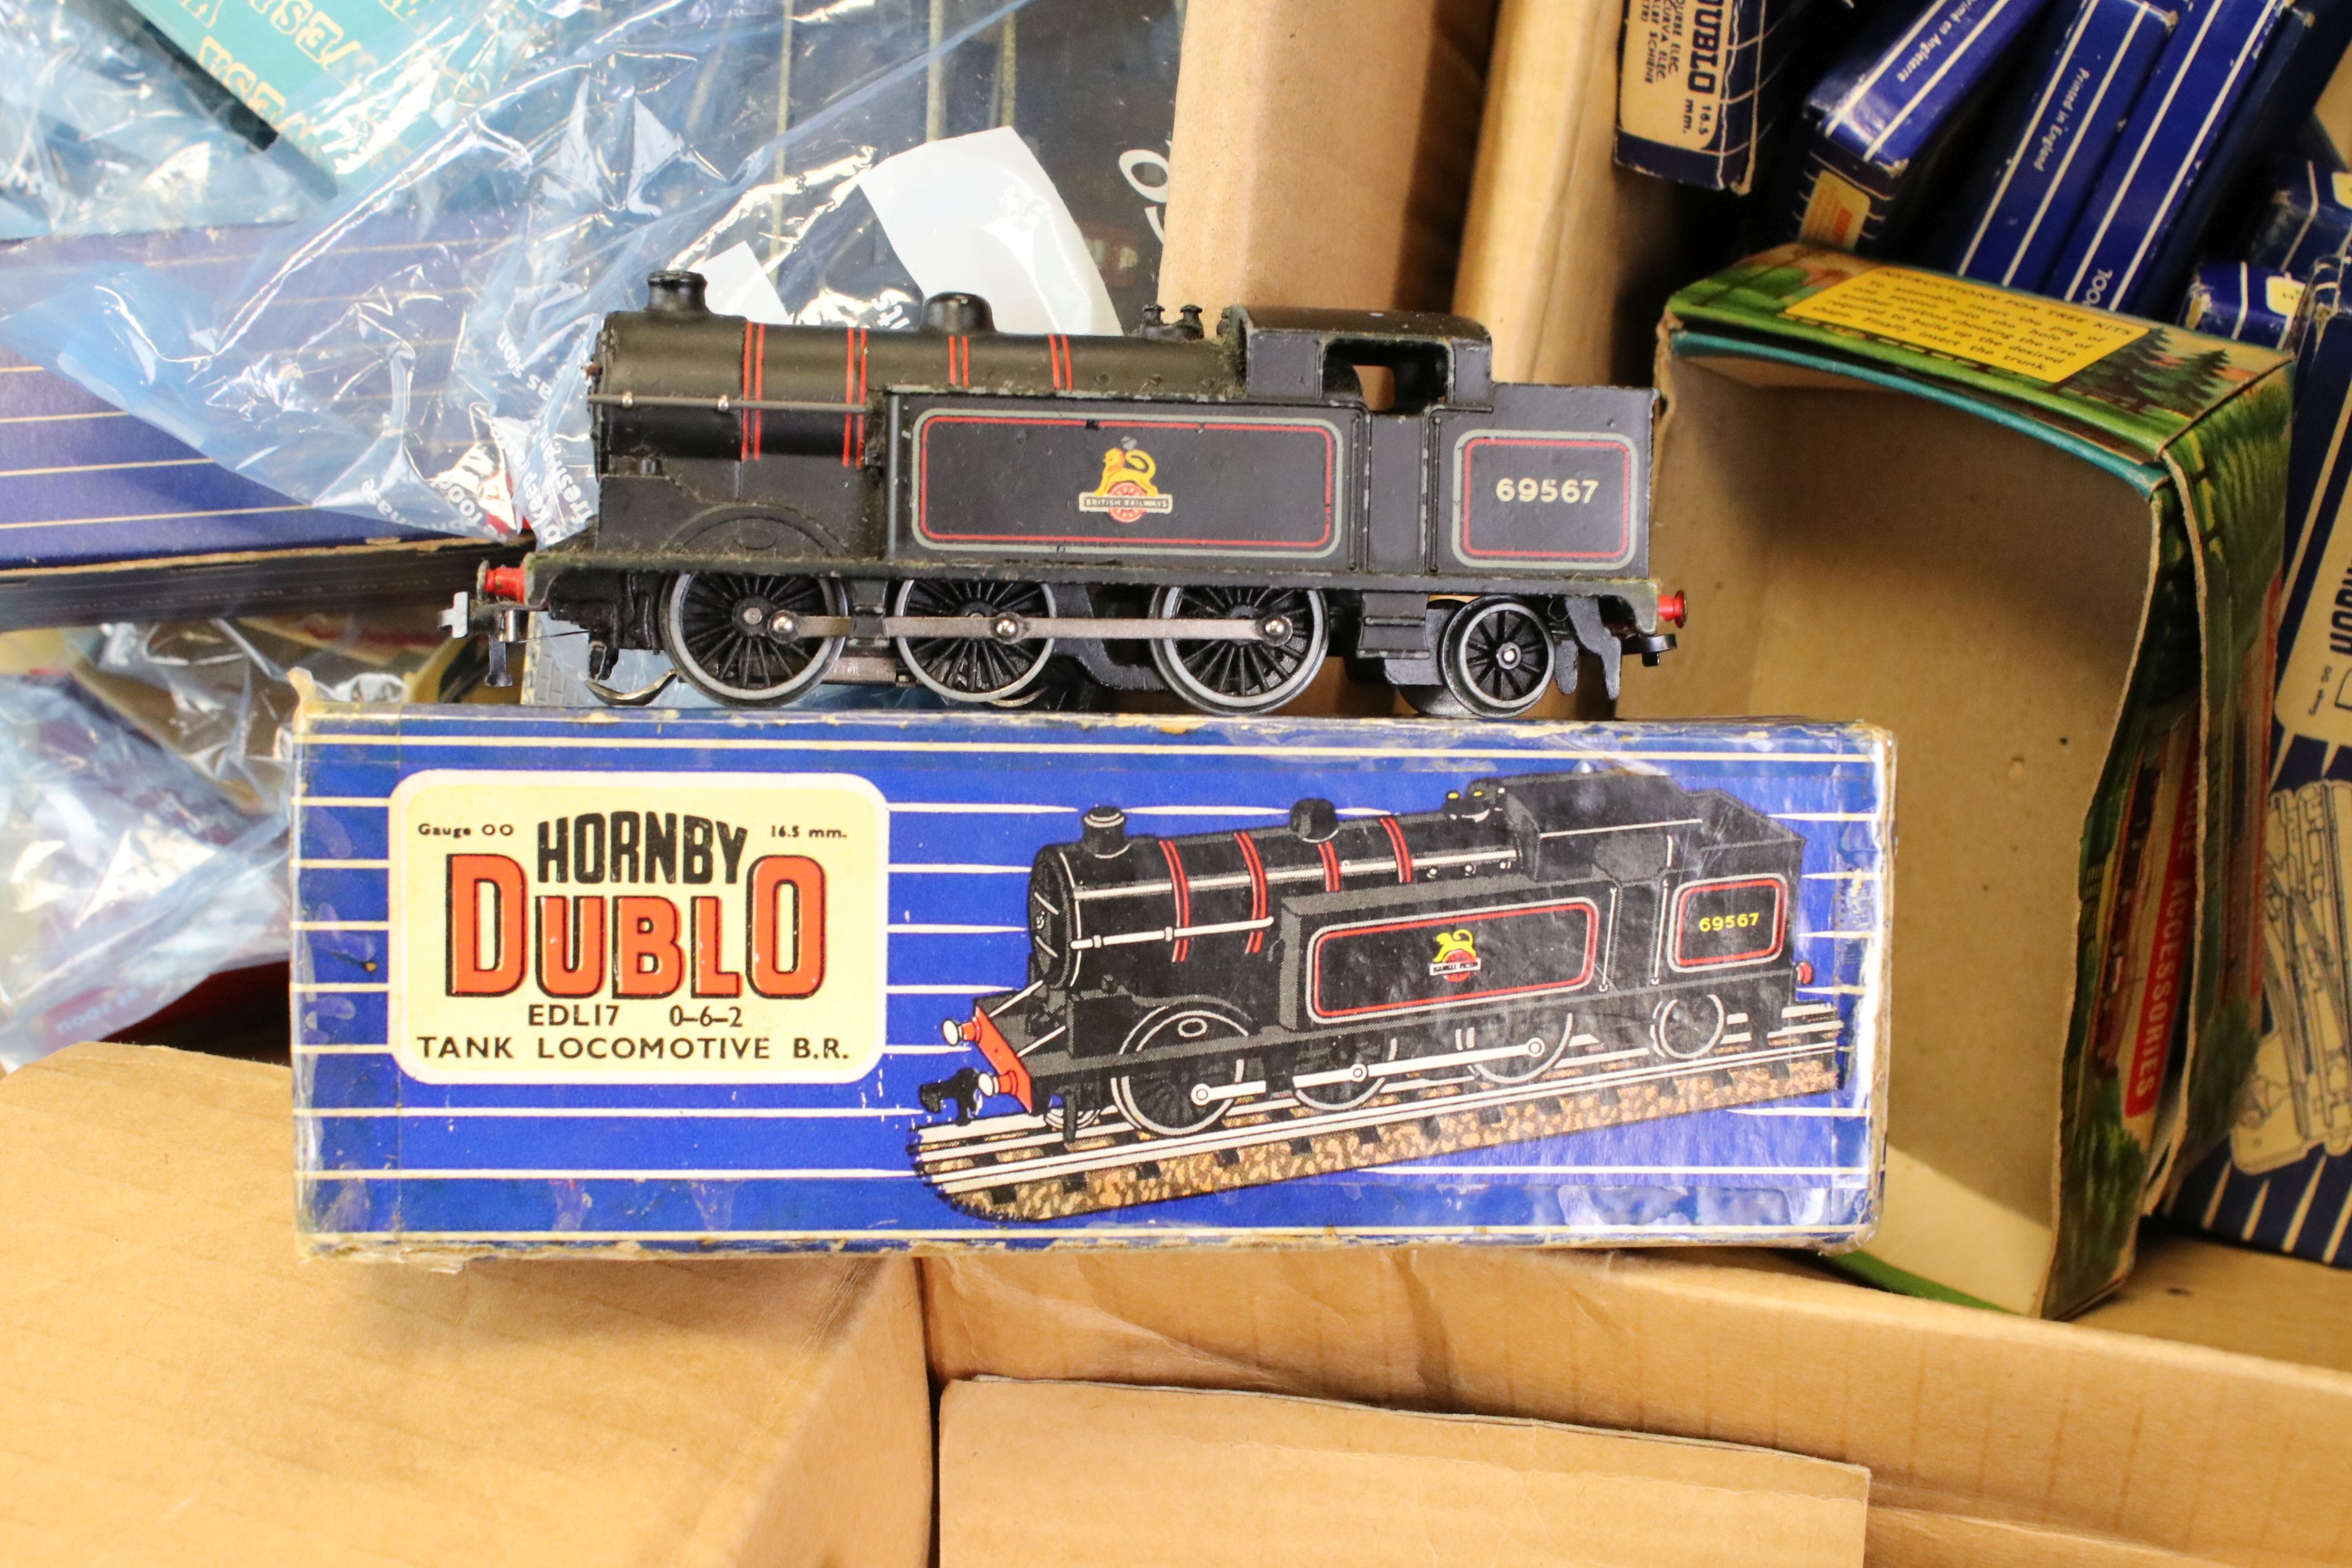 Quantity of Hornby Dublo model railway with OO gauge accessories to include a boxed EDL17 0-6-2 Tank - Image 3 of 8